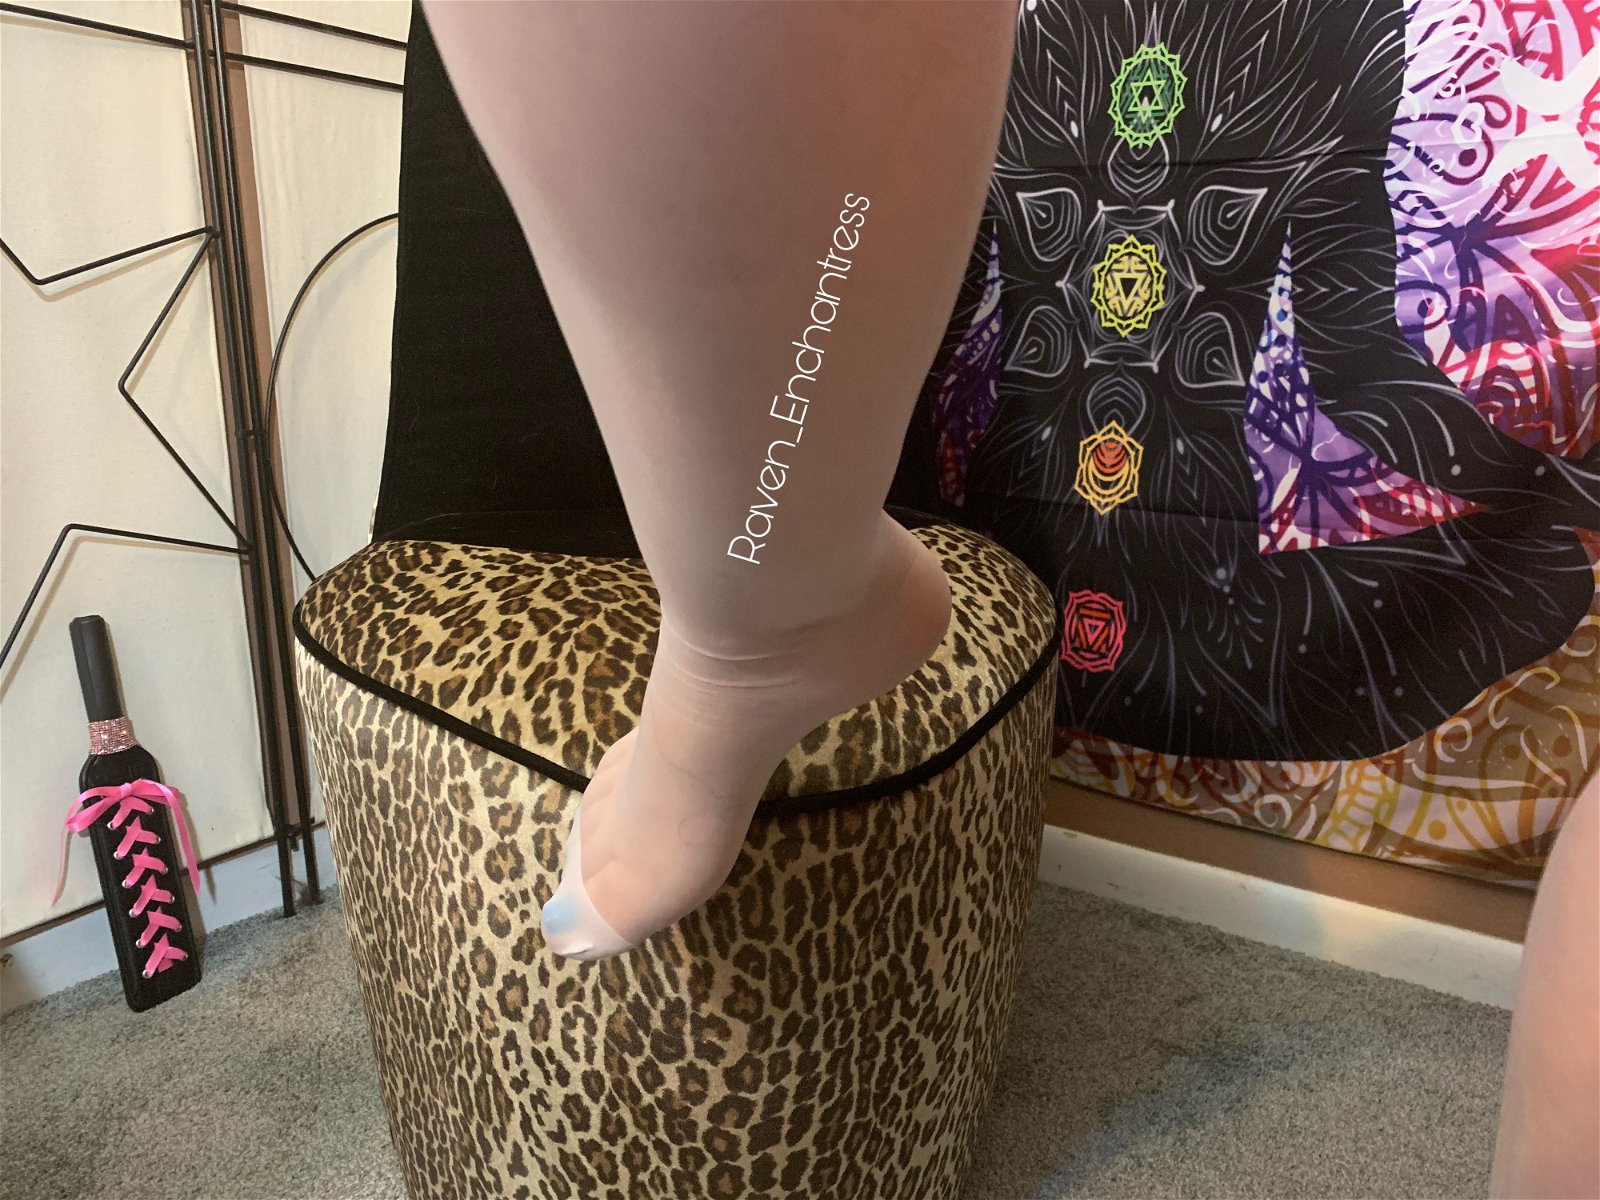 Photo by Raven_Enchantress with the username @curvyraven, who is a star user,  March 21, 2020 at 4:43 PM. The post is about the topic Stockings and the text says 'dipping my toes into spring. XOXO how are you spending your day?

https://raven_enchantress.manyvids.com/

#feet #feetinstockings #stockings #footfetish
#legs #sexylegs'